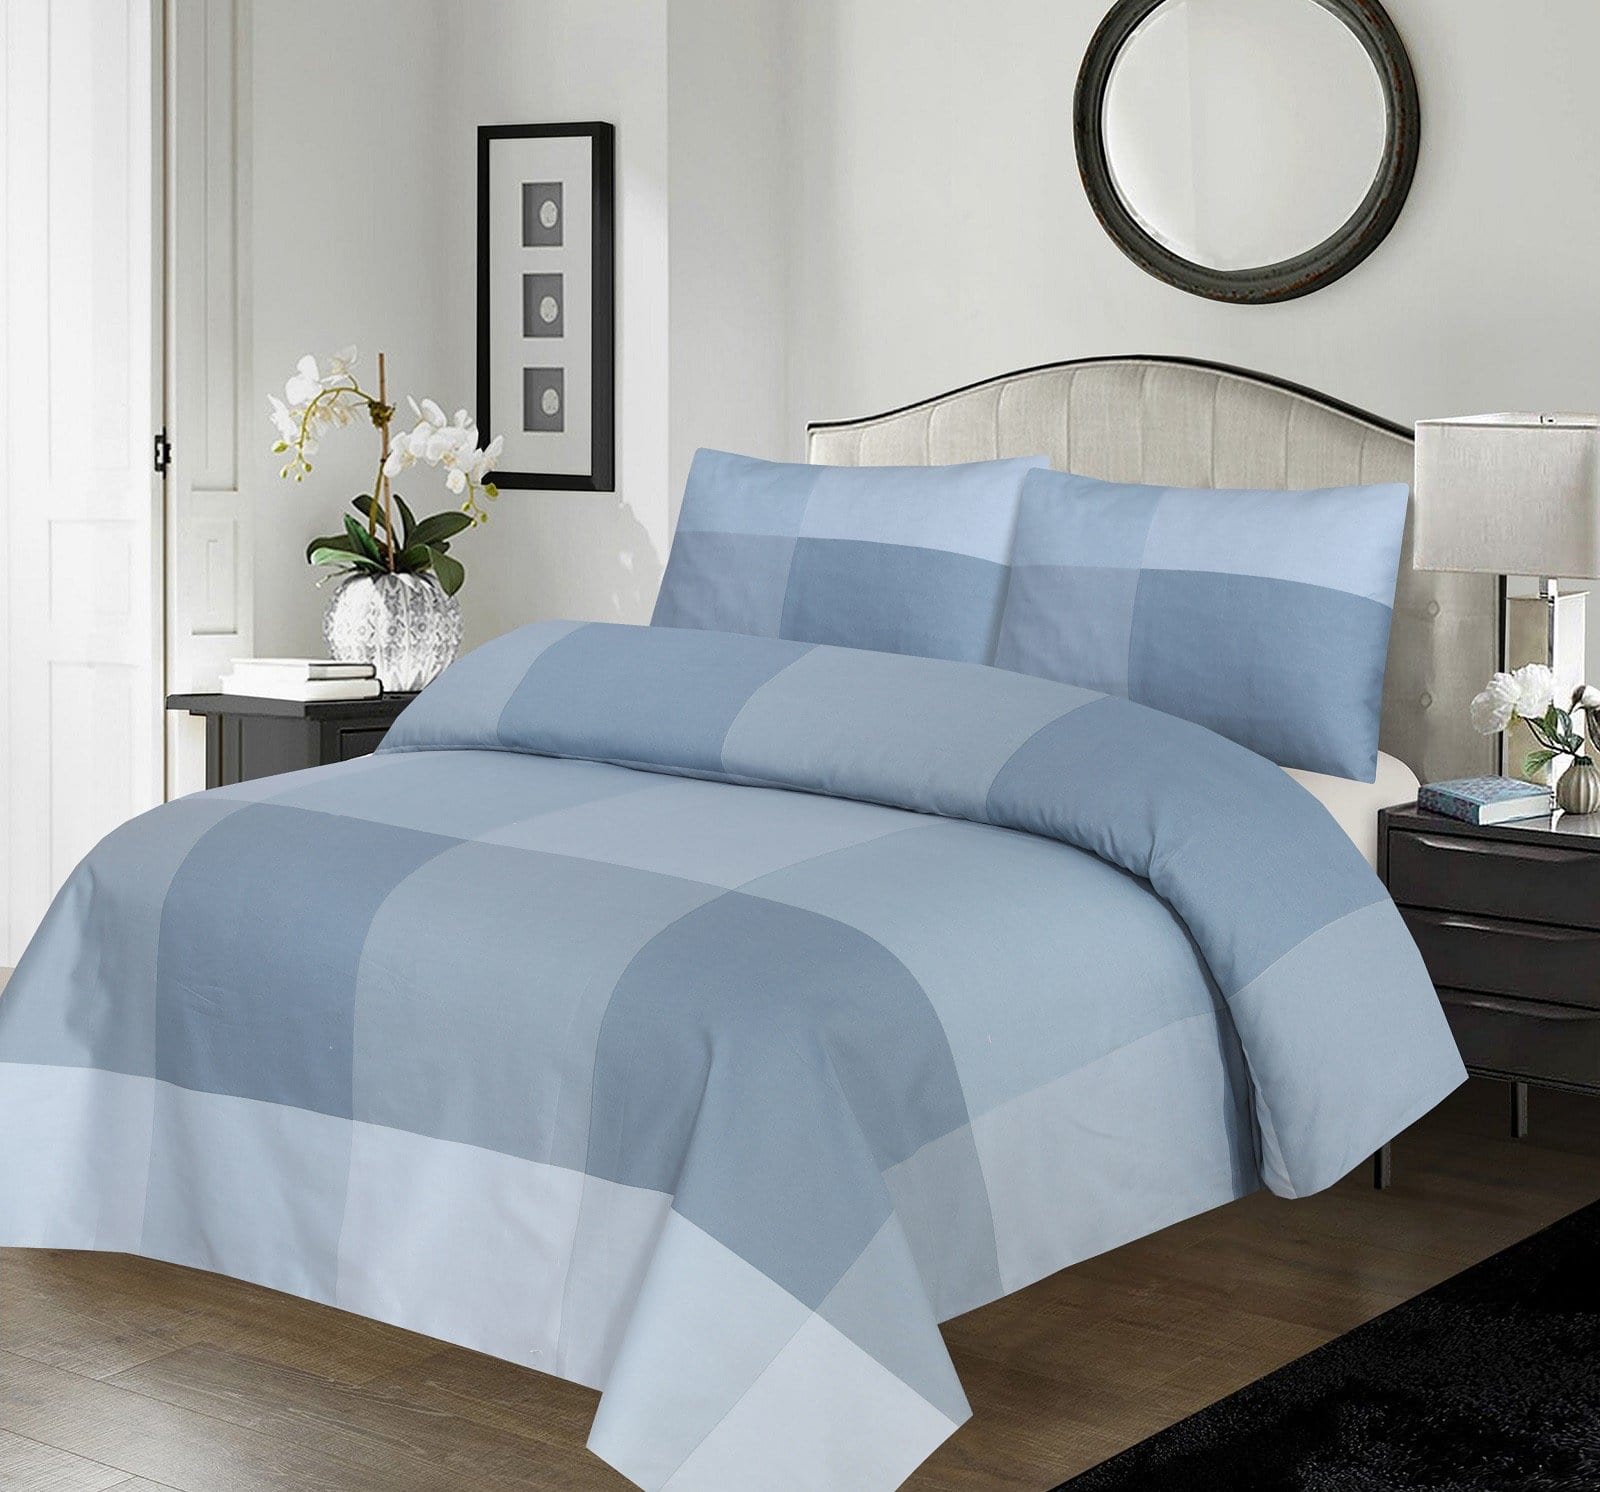 Grace D471-Cotton PC King Size Bedsheet with 2 Pillow Covers.